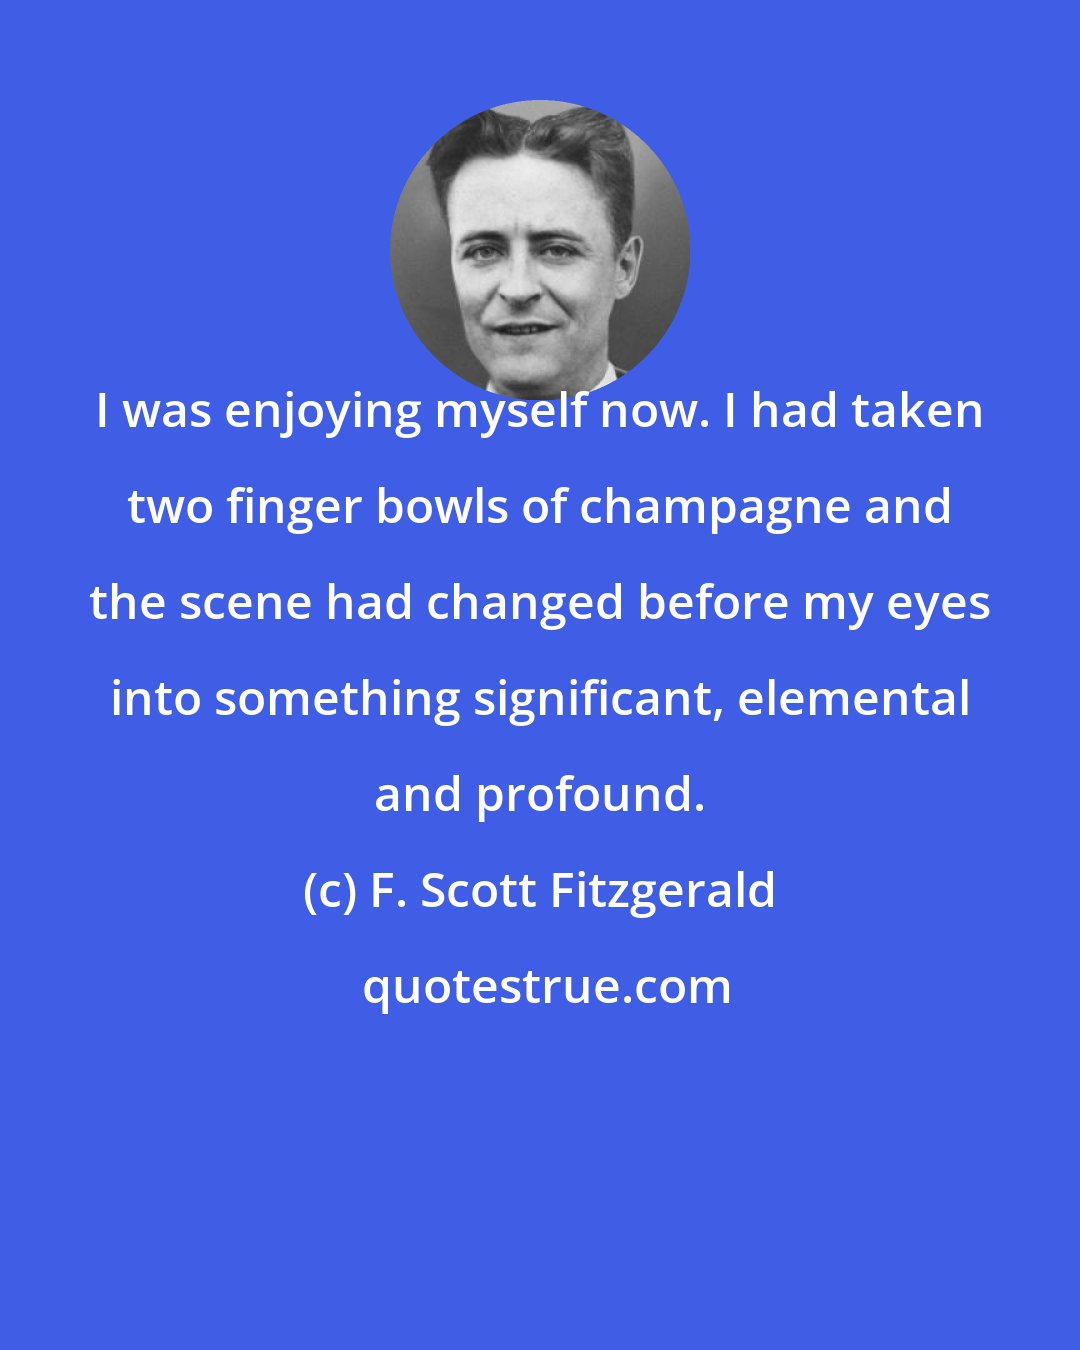 F. Scott Fitzgerald: I was enjoying myself now. I had taken two finger bowls of champagne and the scene had changed before my eyes into something significant, elemental and profound.